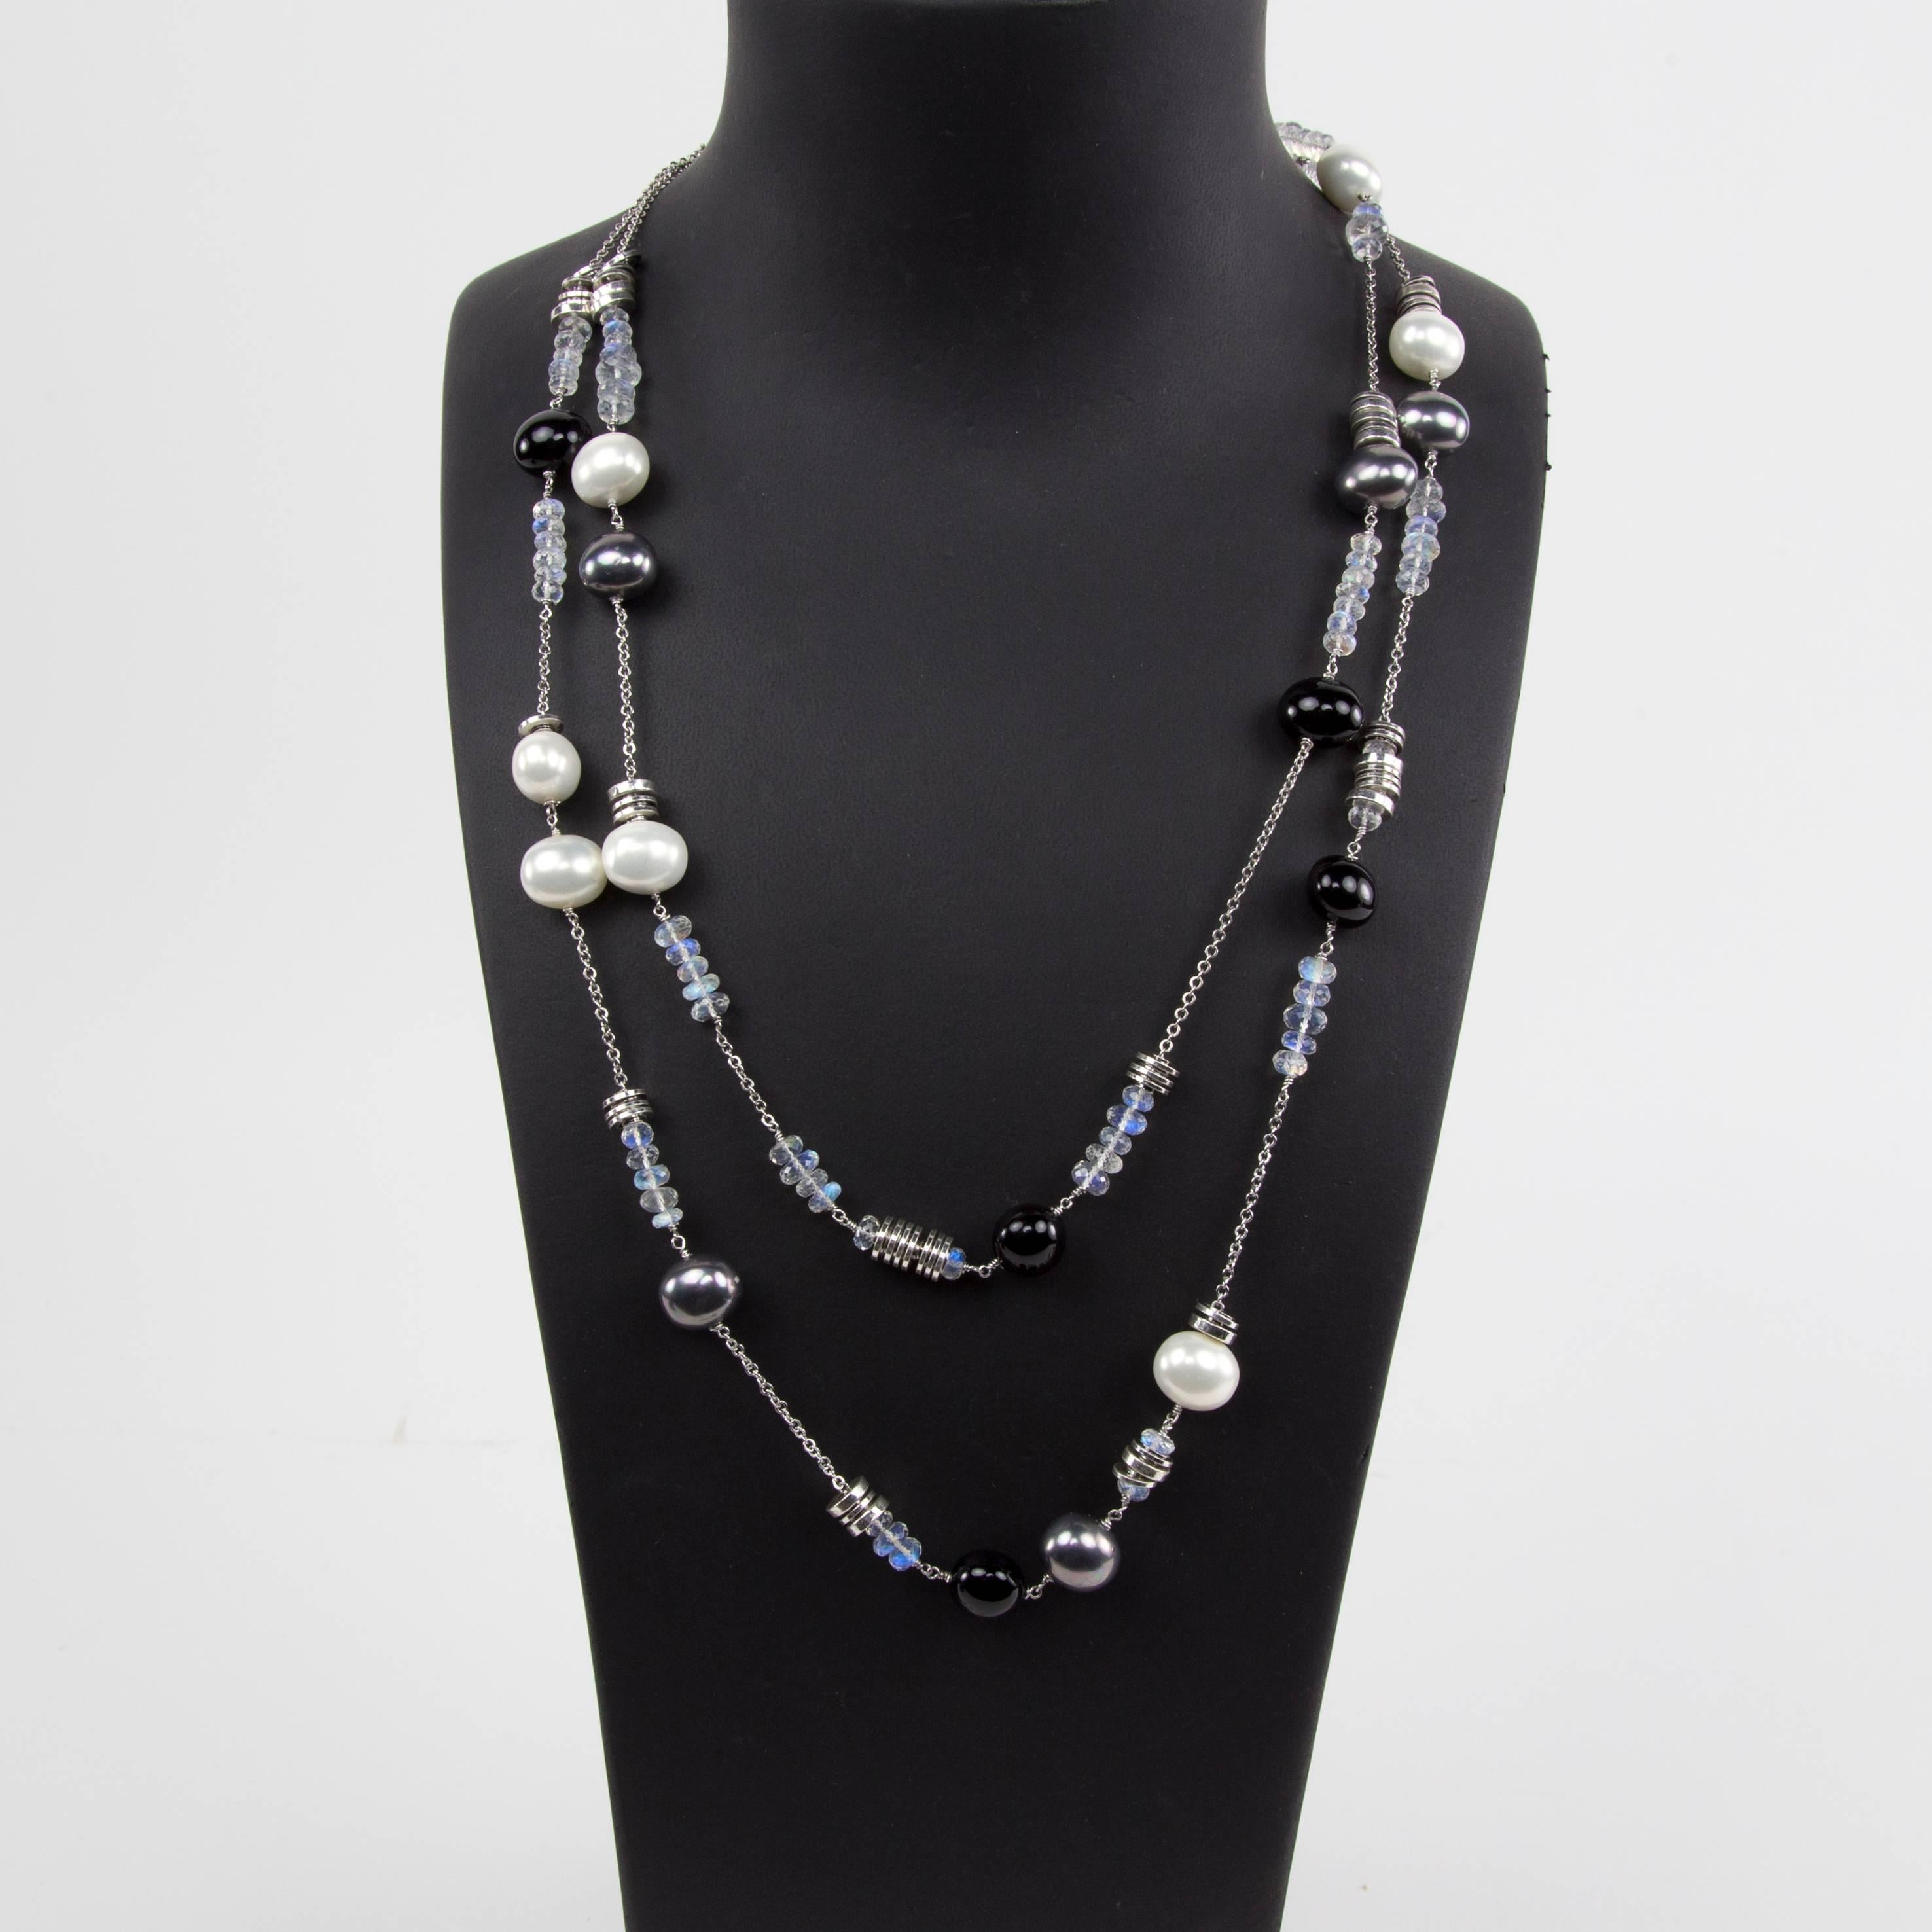 Long Chic black, gray and white Faux Pearl Statement Necklace inter-spaced with facet opalescent crystal and silver Beads on Sterling Silver chain; A Striking 58 inches long! Circa 1980s. A perfect complement to every wardrobe…Illuminating your Look